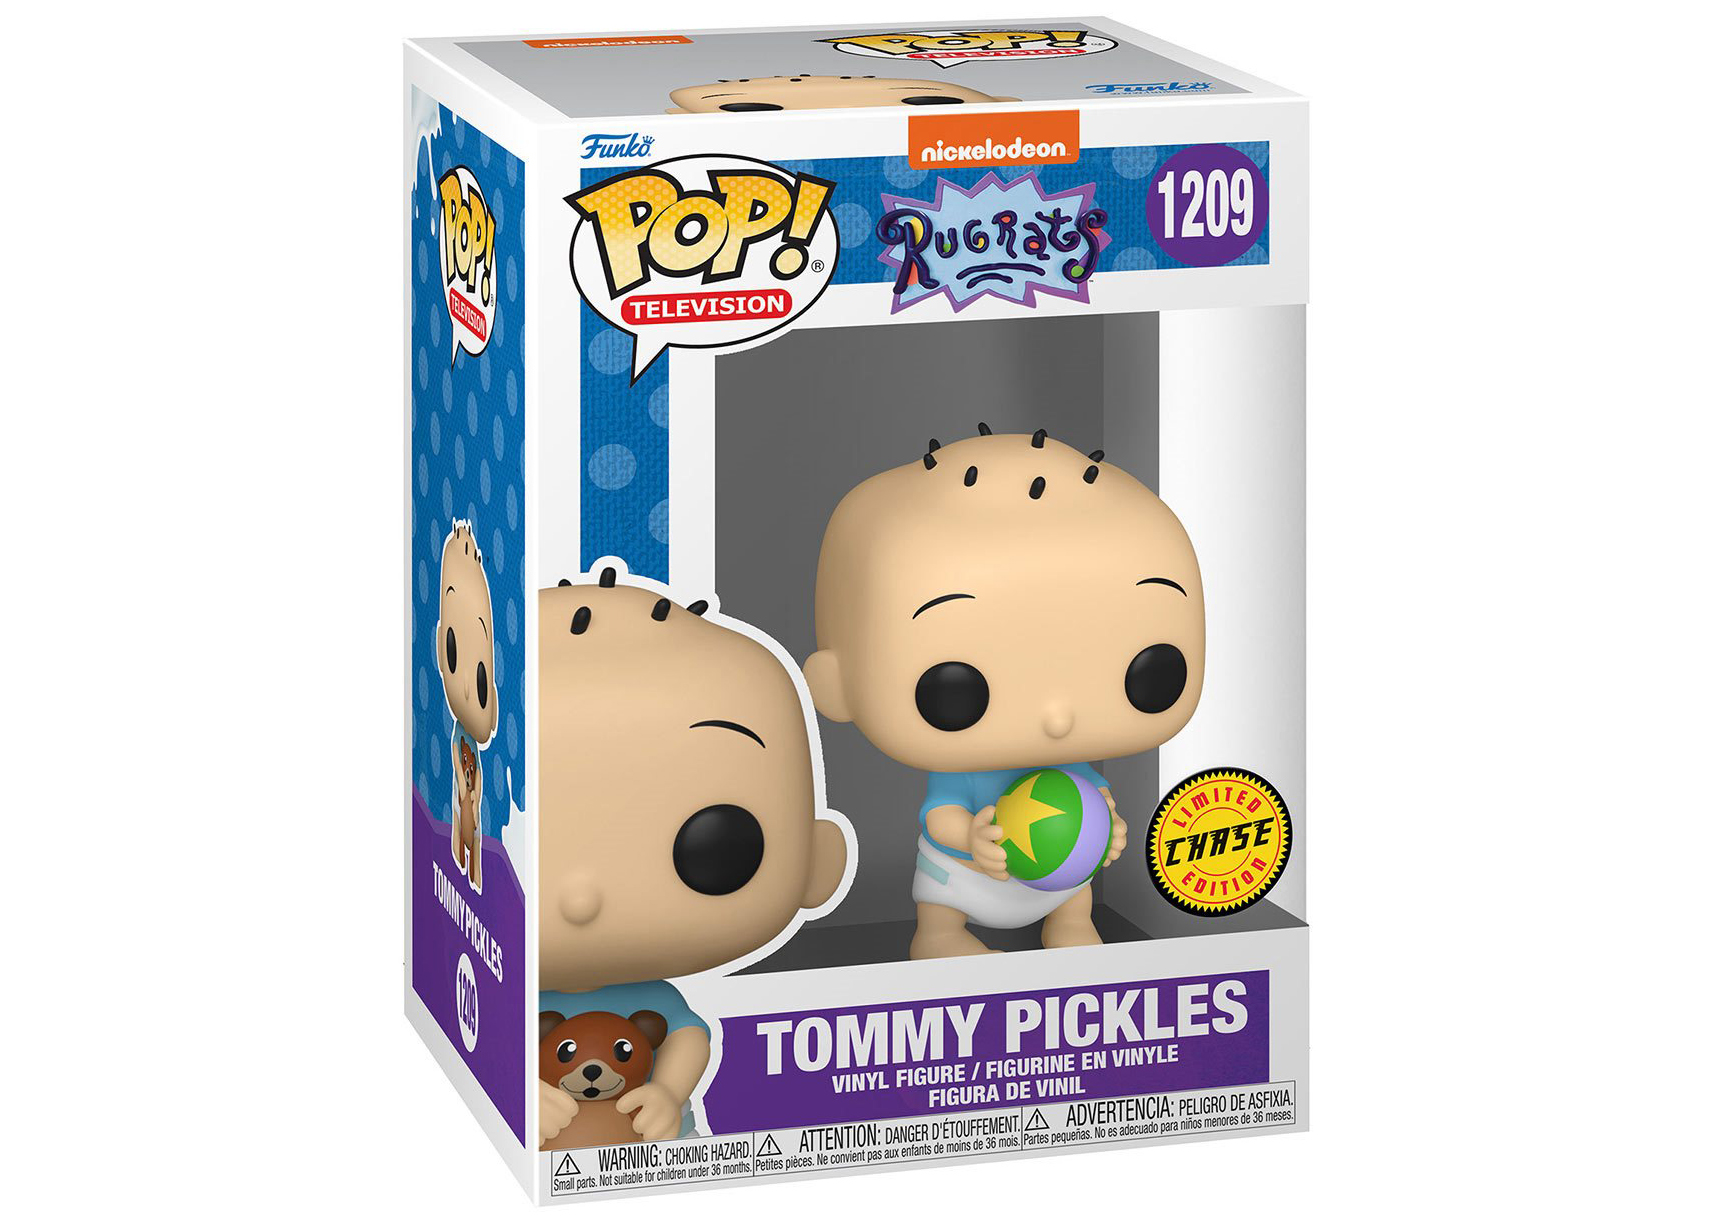 Funko Pop! Television Rugrats Tommy Pickles Chase Edition Figure 